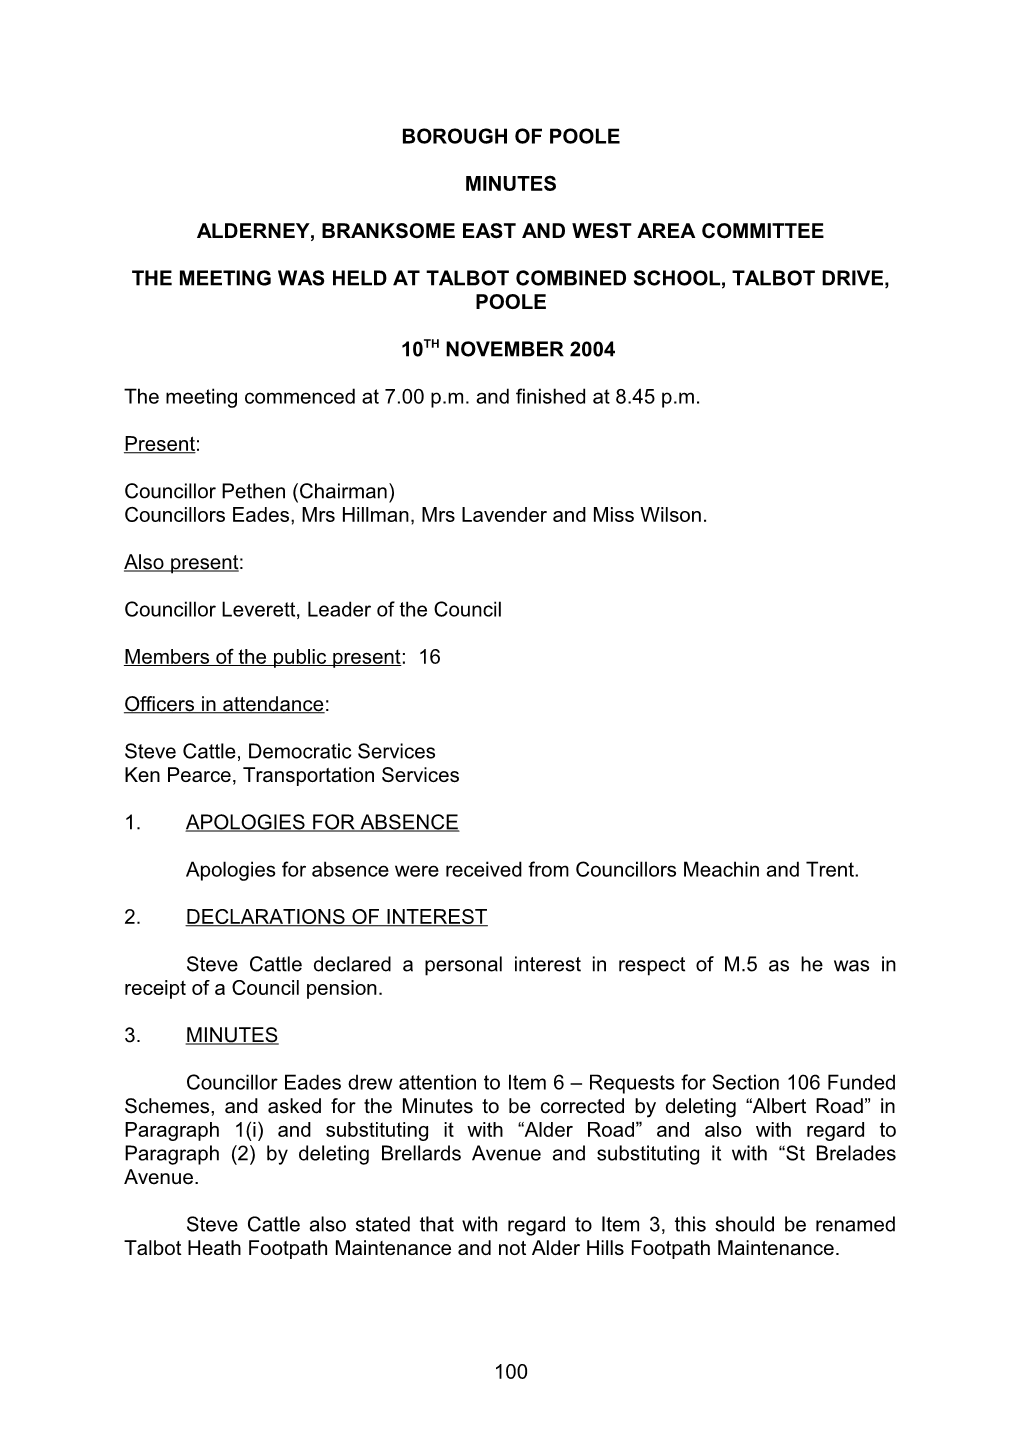 Minutes - Alderney, Branksome East and West Area Committee - 10Th November 2004